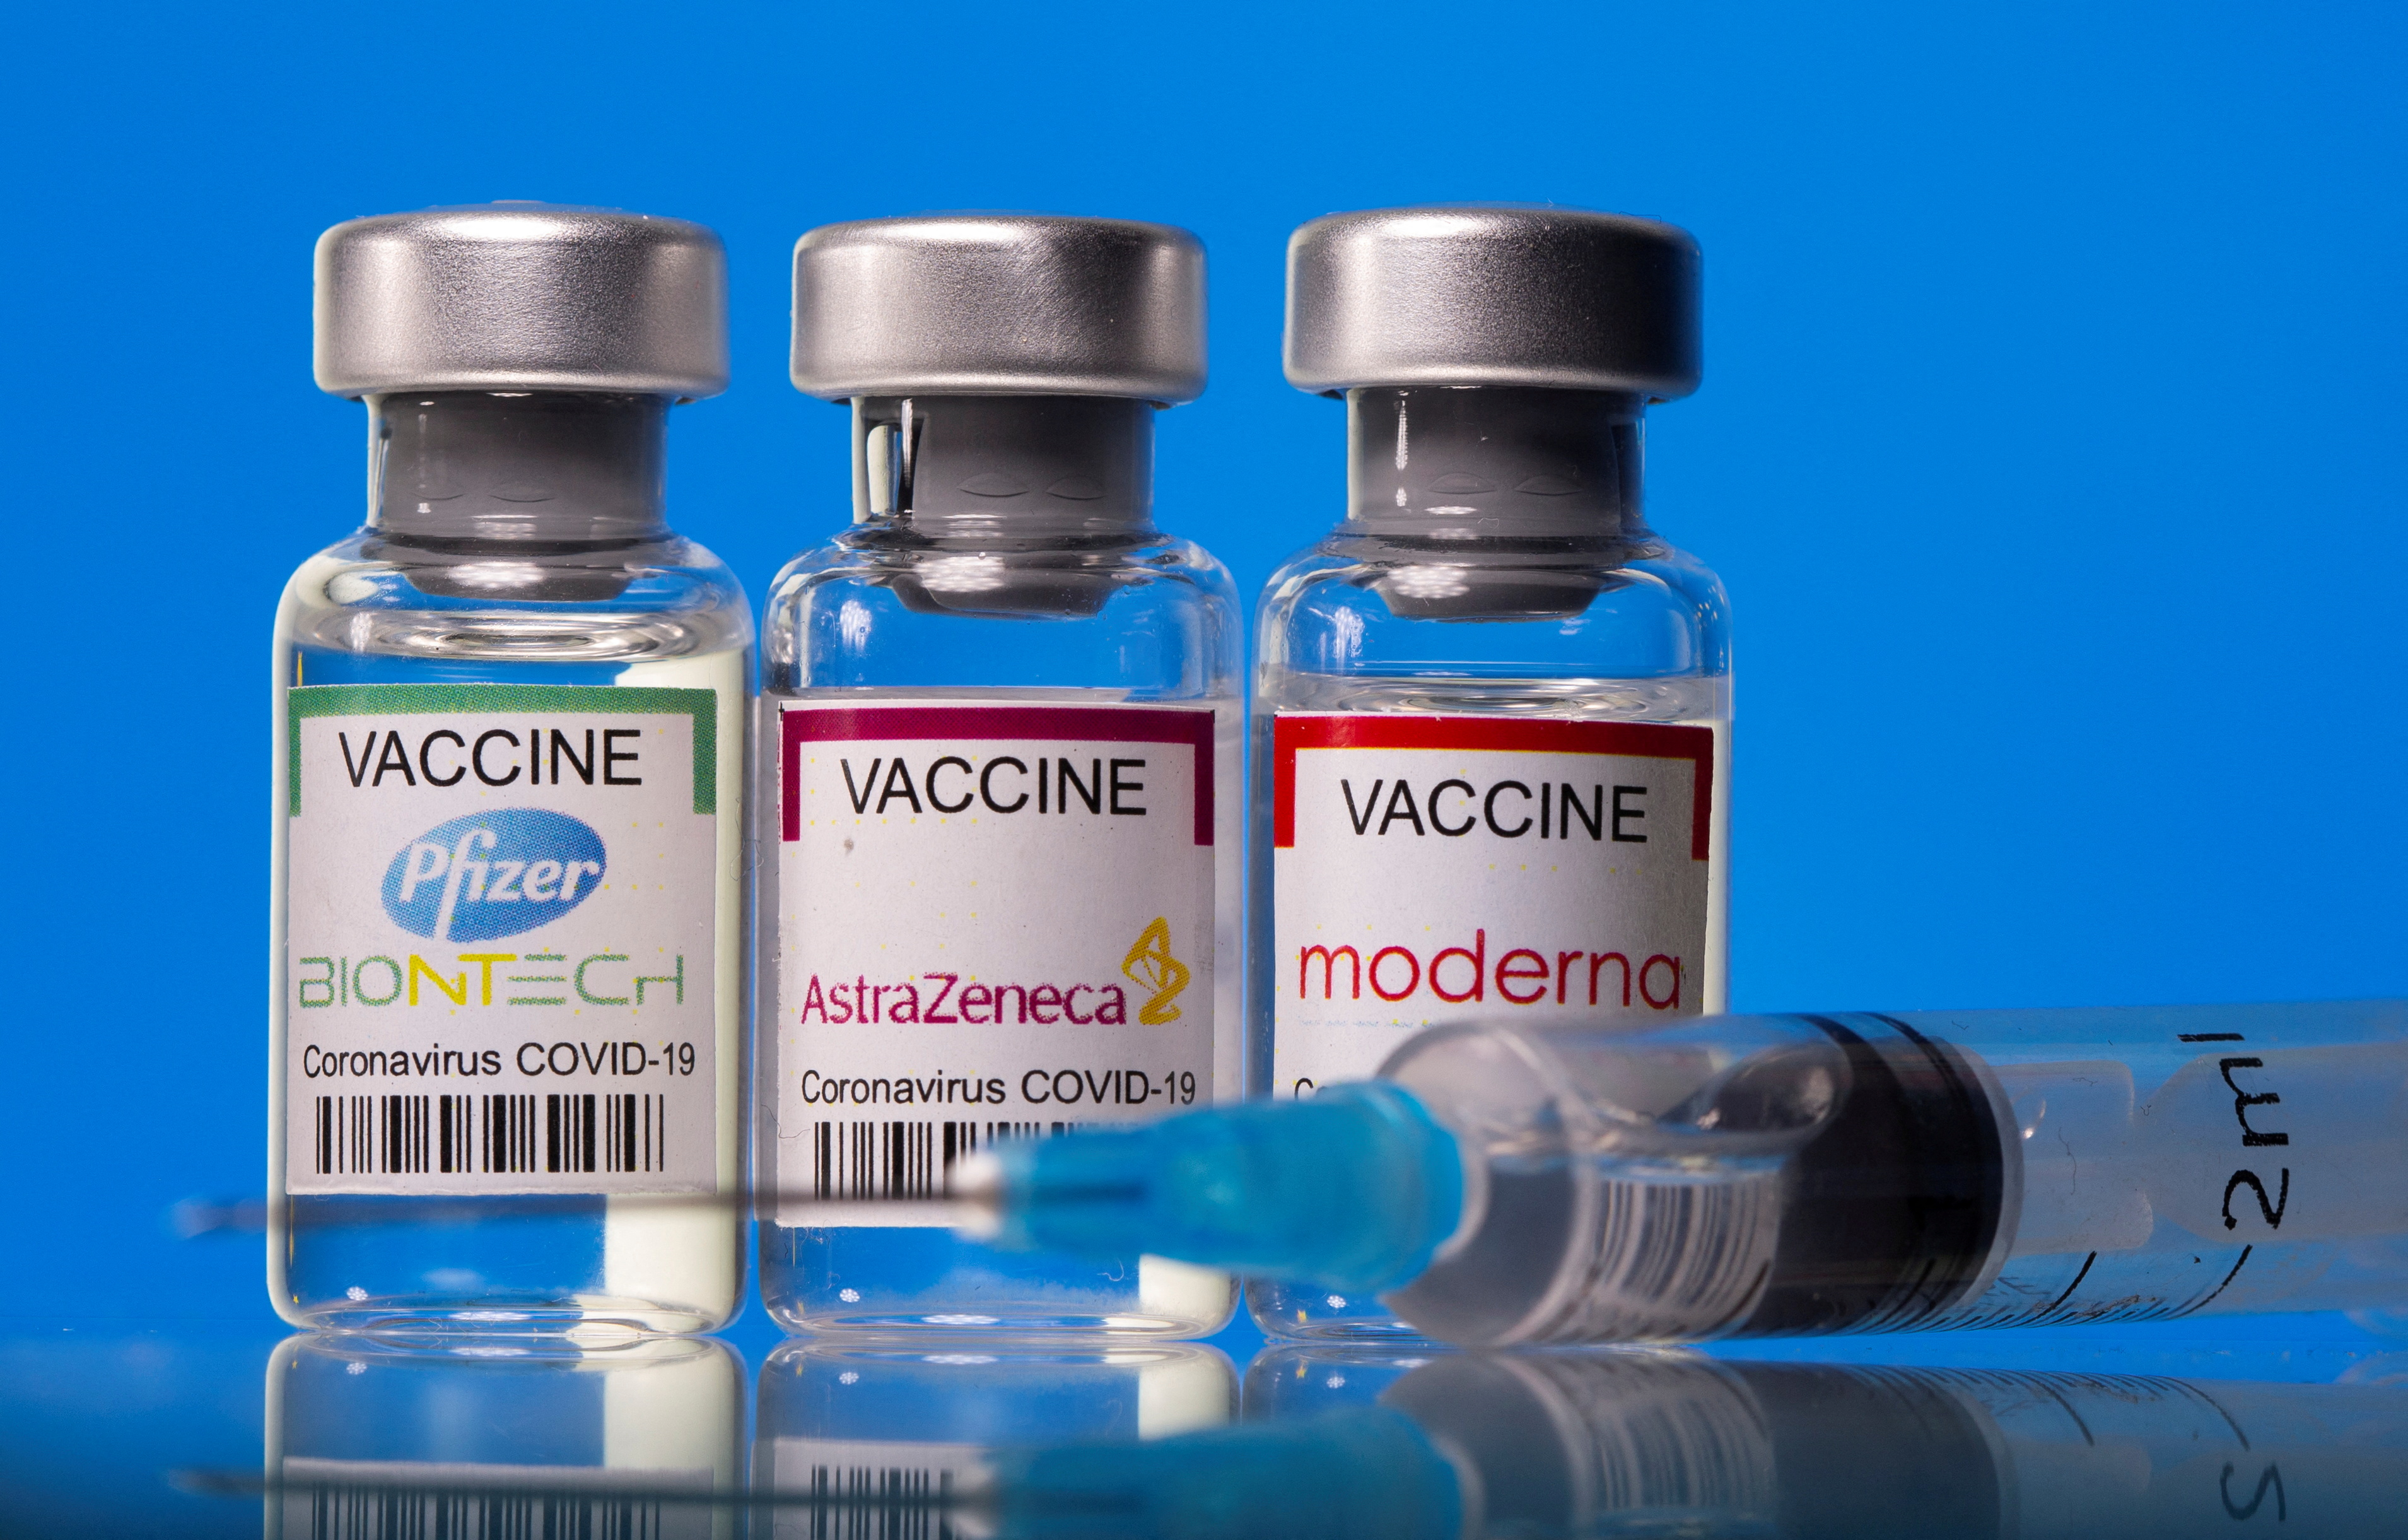 Picture illustration of vials with Pfizer-BioNTech, AstraZeneca, and Moderna coronavirus disease (COVID-19) vaccine labels